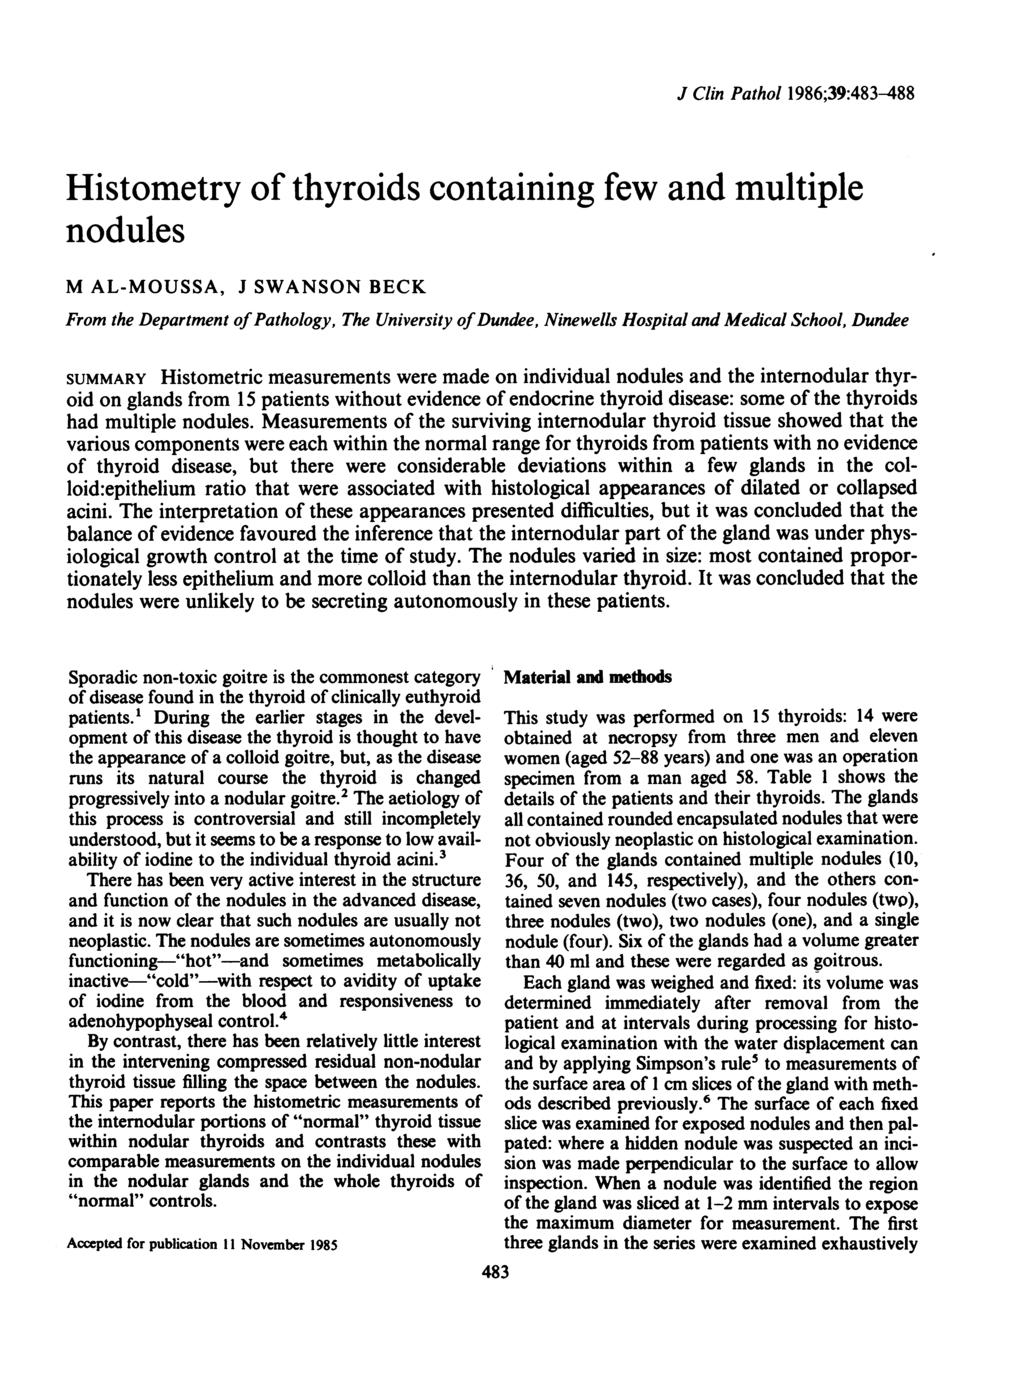 J Clin Pthol 1986;39:483-488 Histometry of thyroids contining few nd multiple nodules M AL-MOUSSA, J SWANSON BECK From the Deprtment ofpthology, The University ofdundee, Ninewells Hospitl nd Medicl